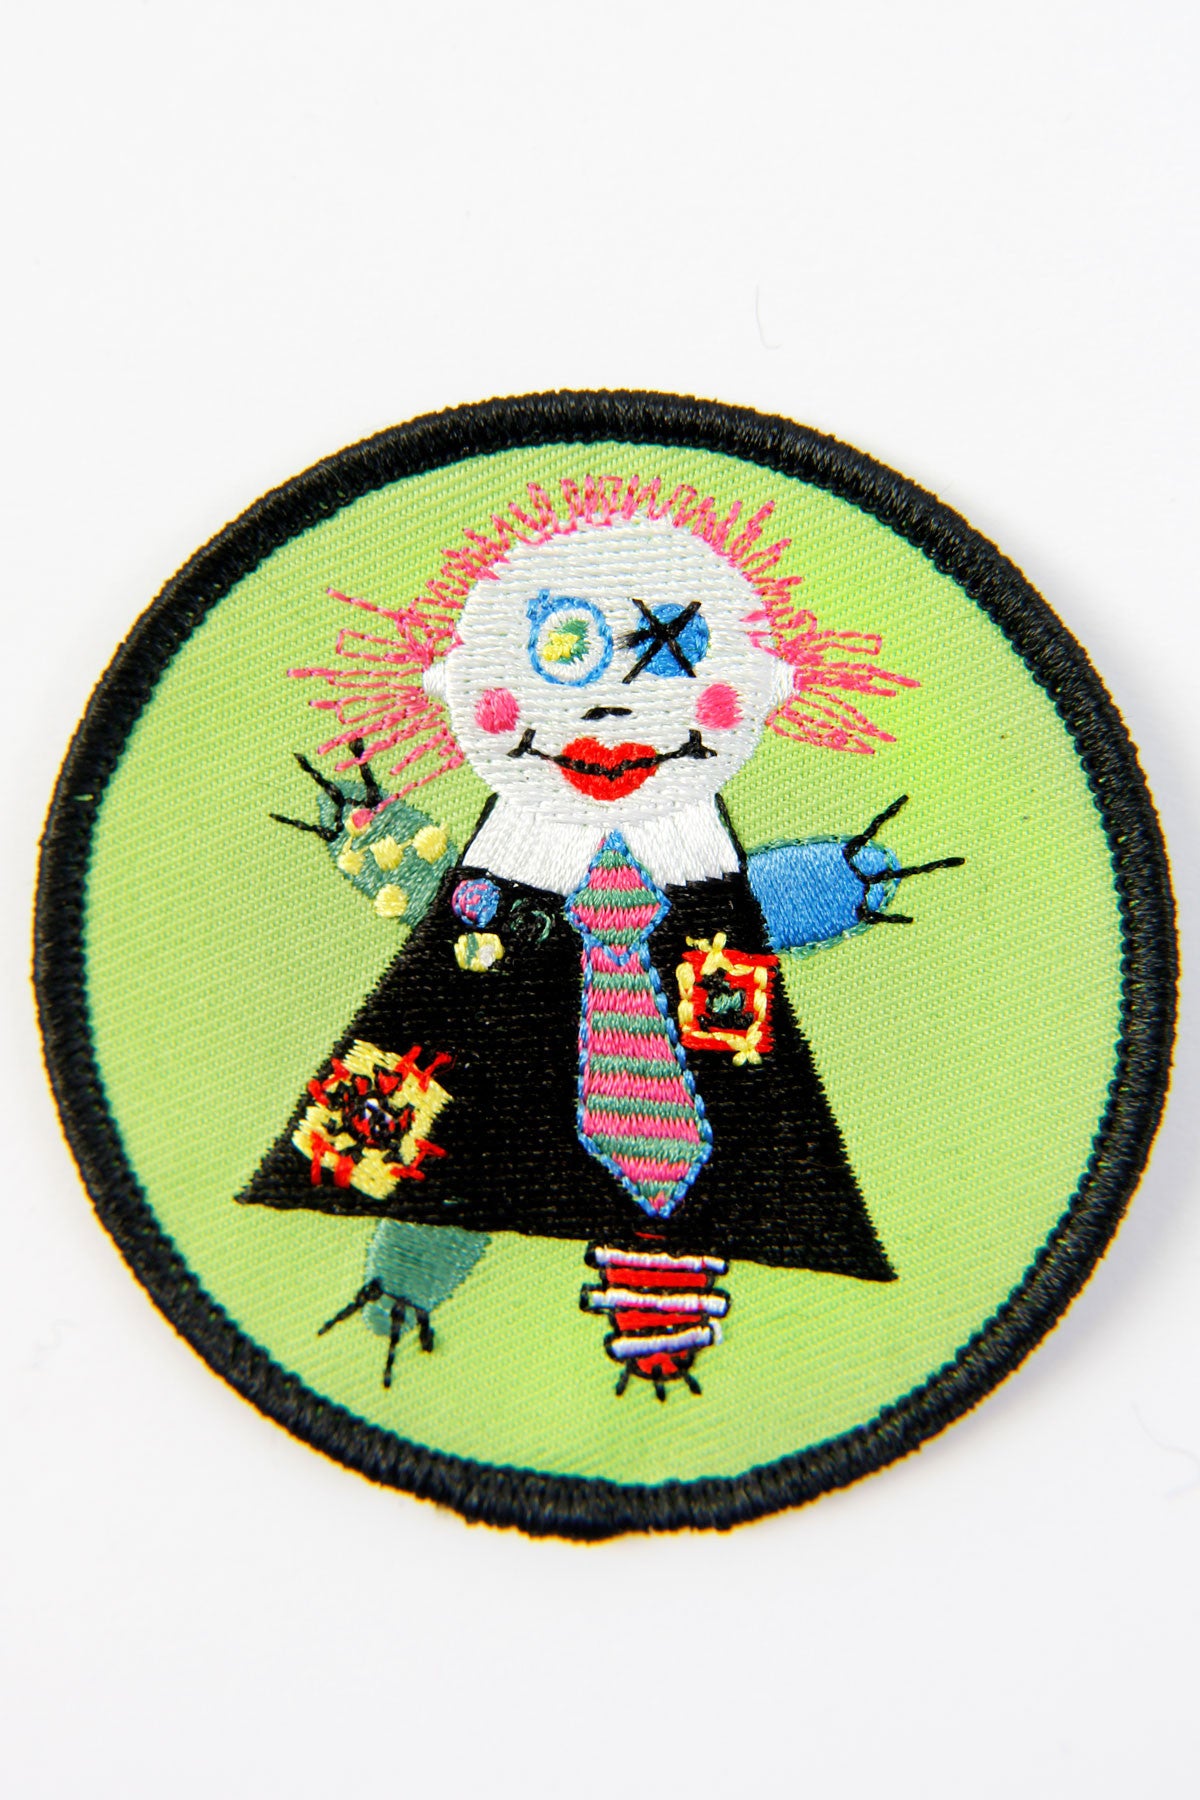 Embroidered Patches - shopjessicalouise.com